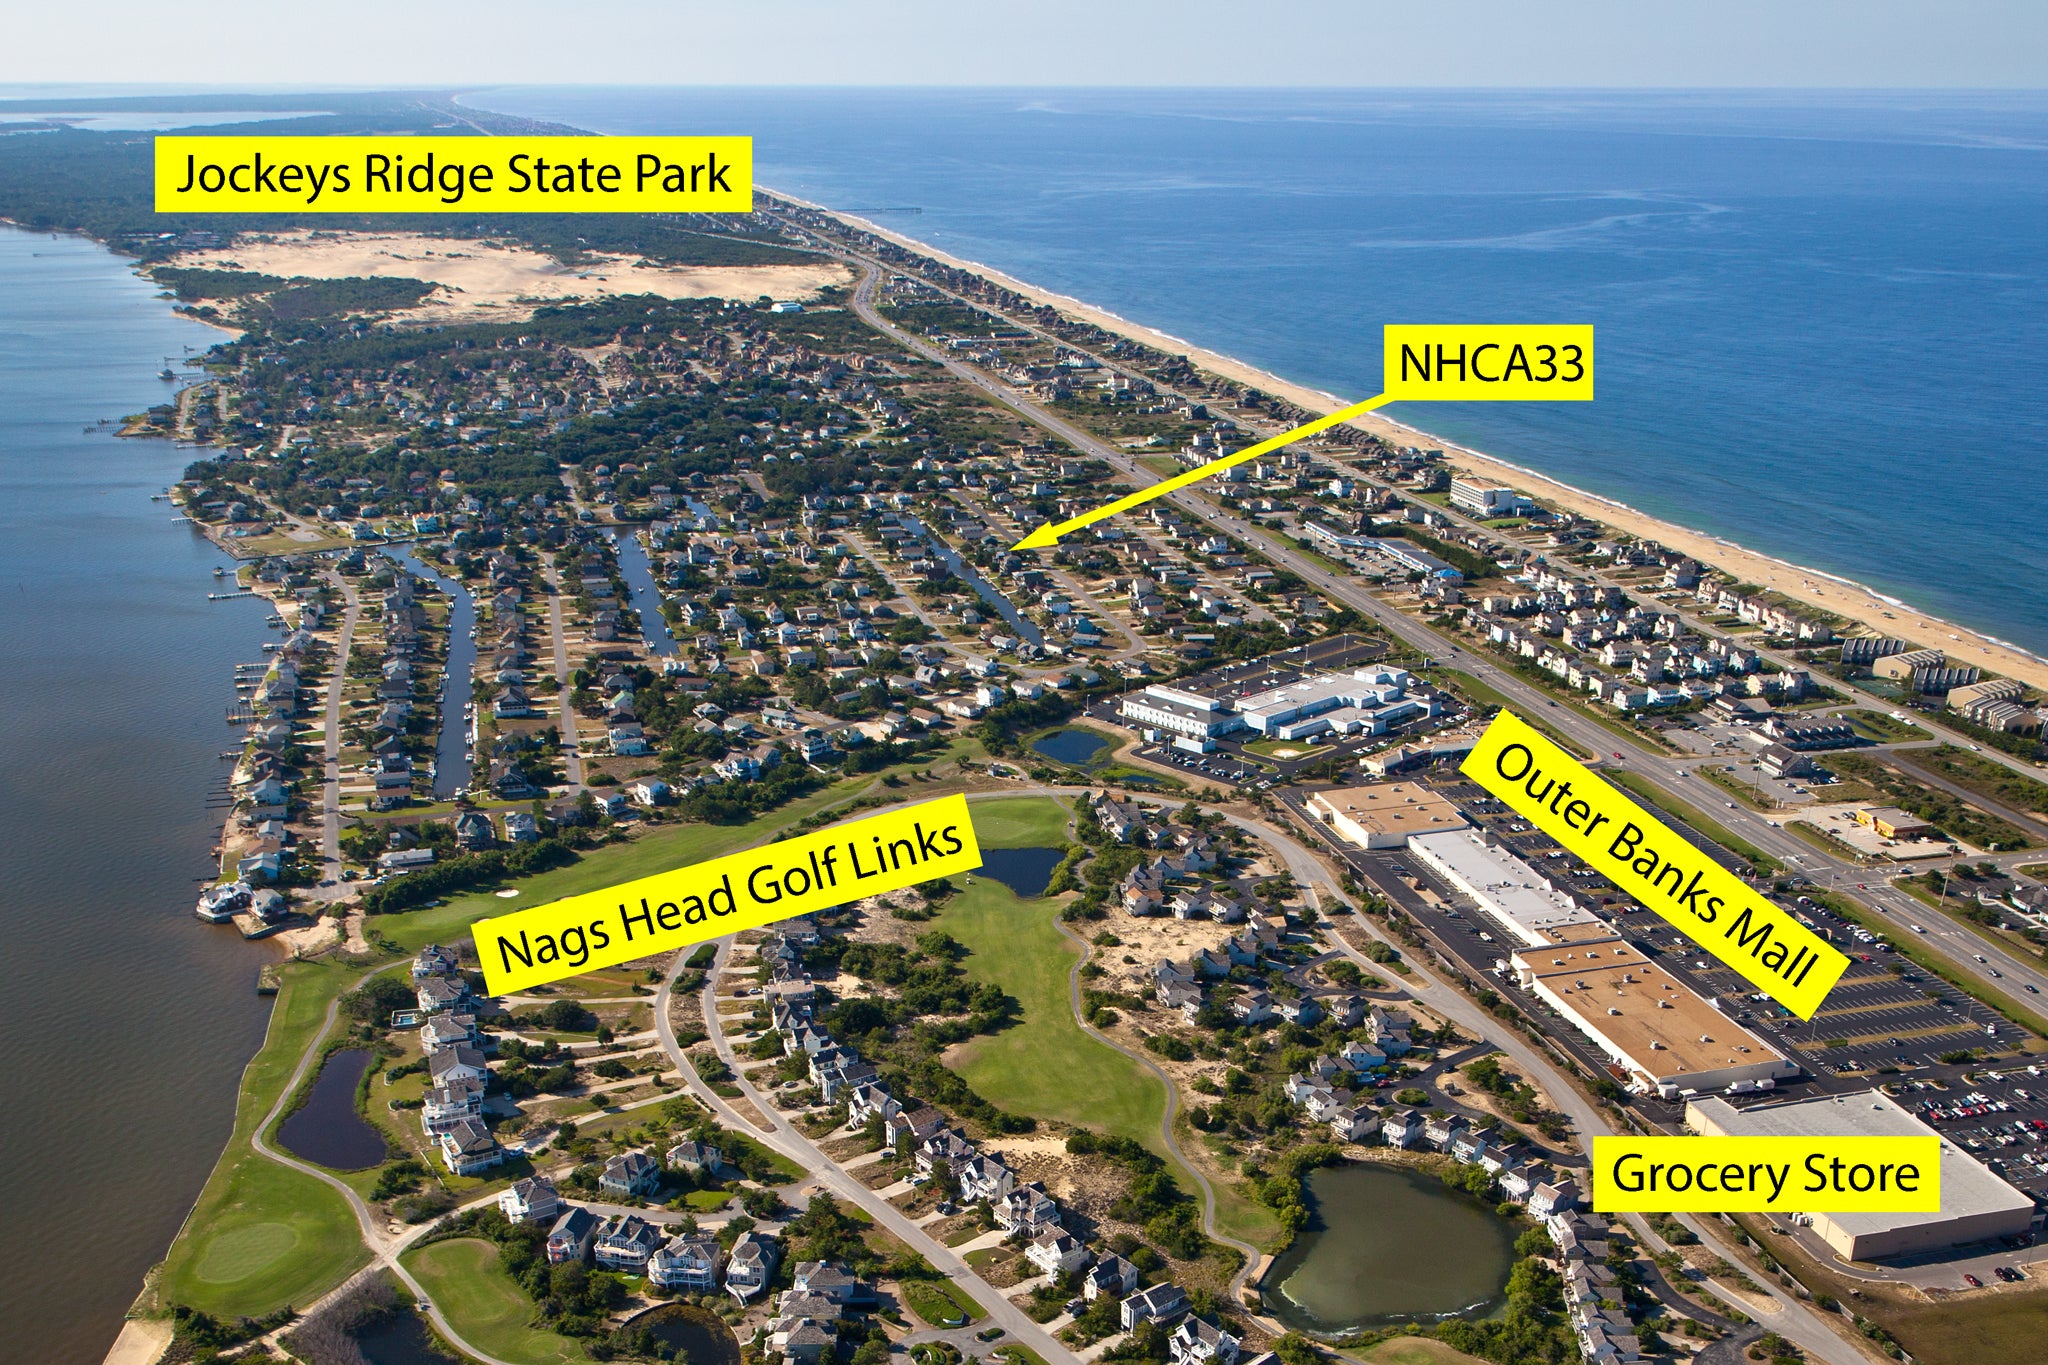 Old Nags Head Cove | Aerial View of Community